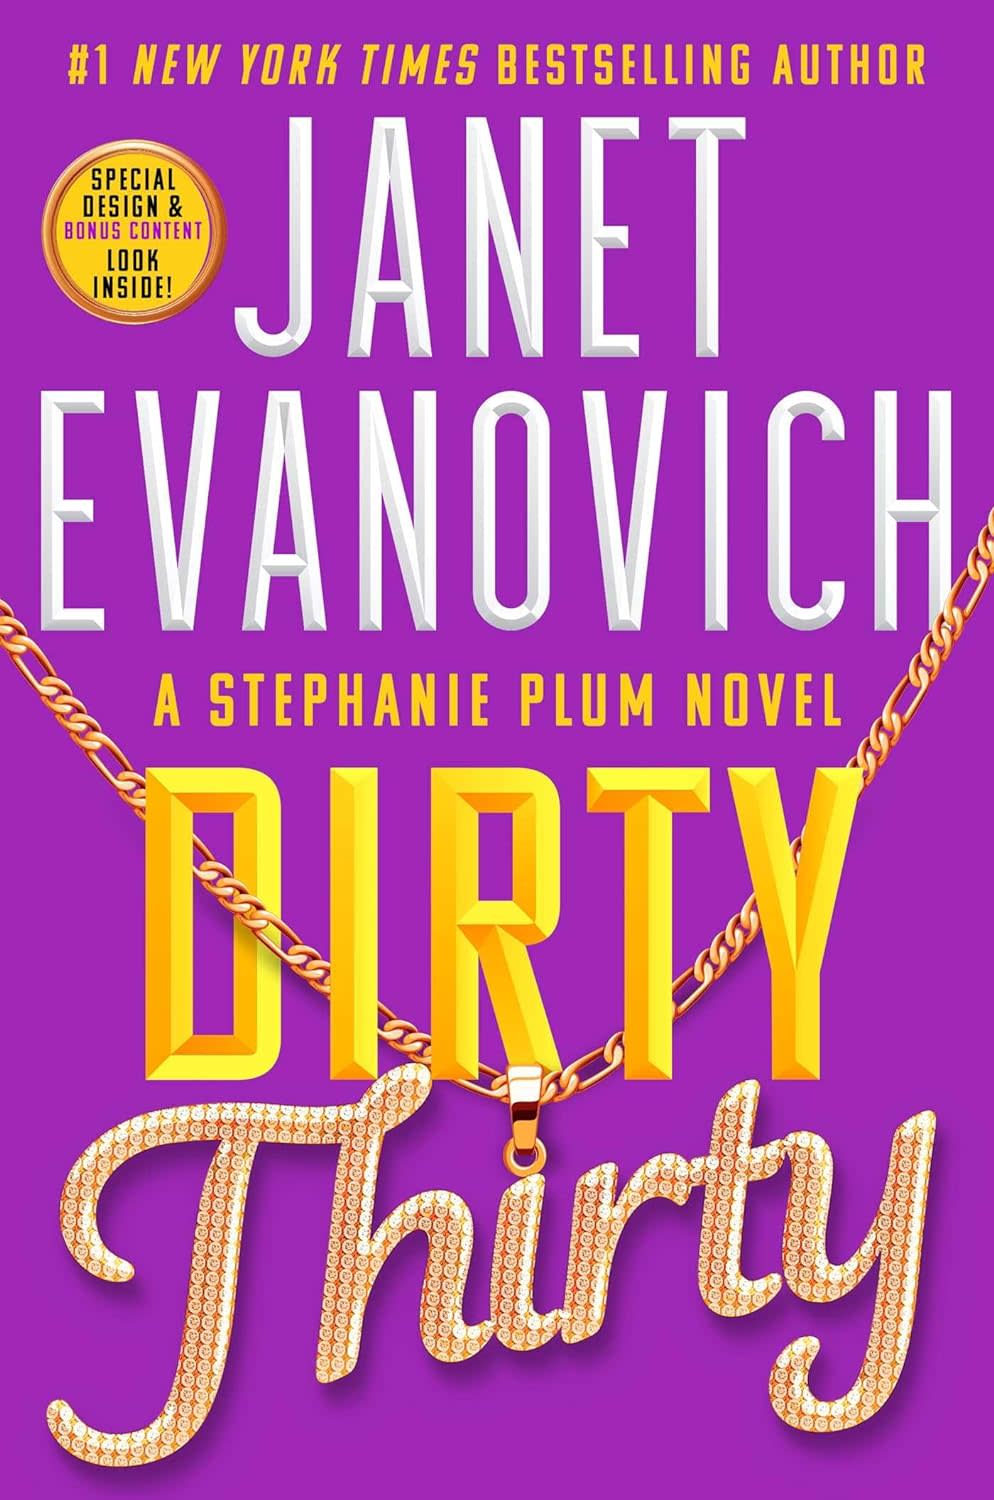 "Dirty Thirty" by Janet Evanovich